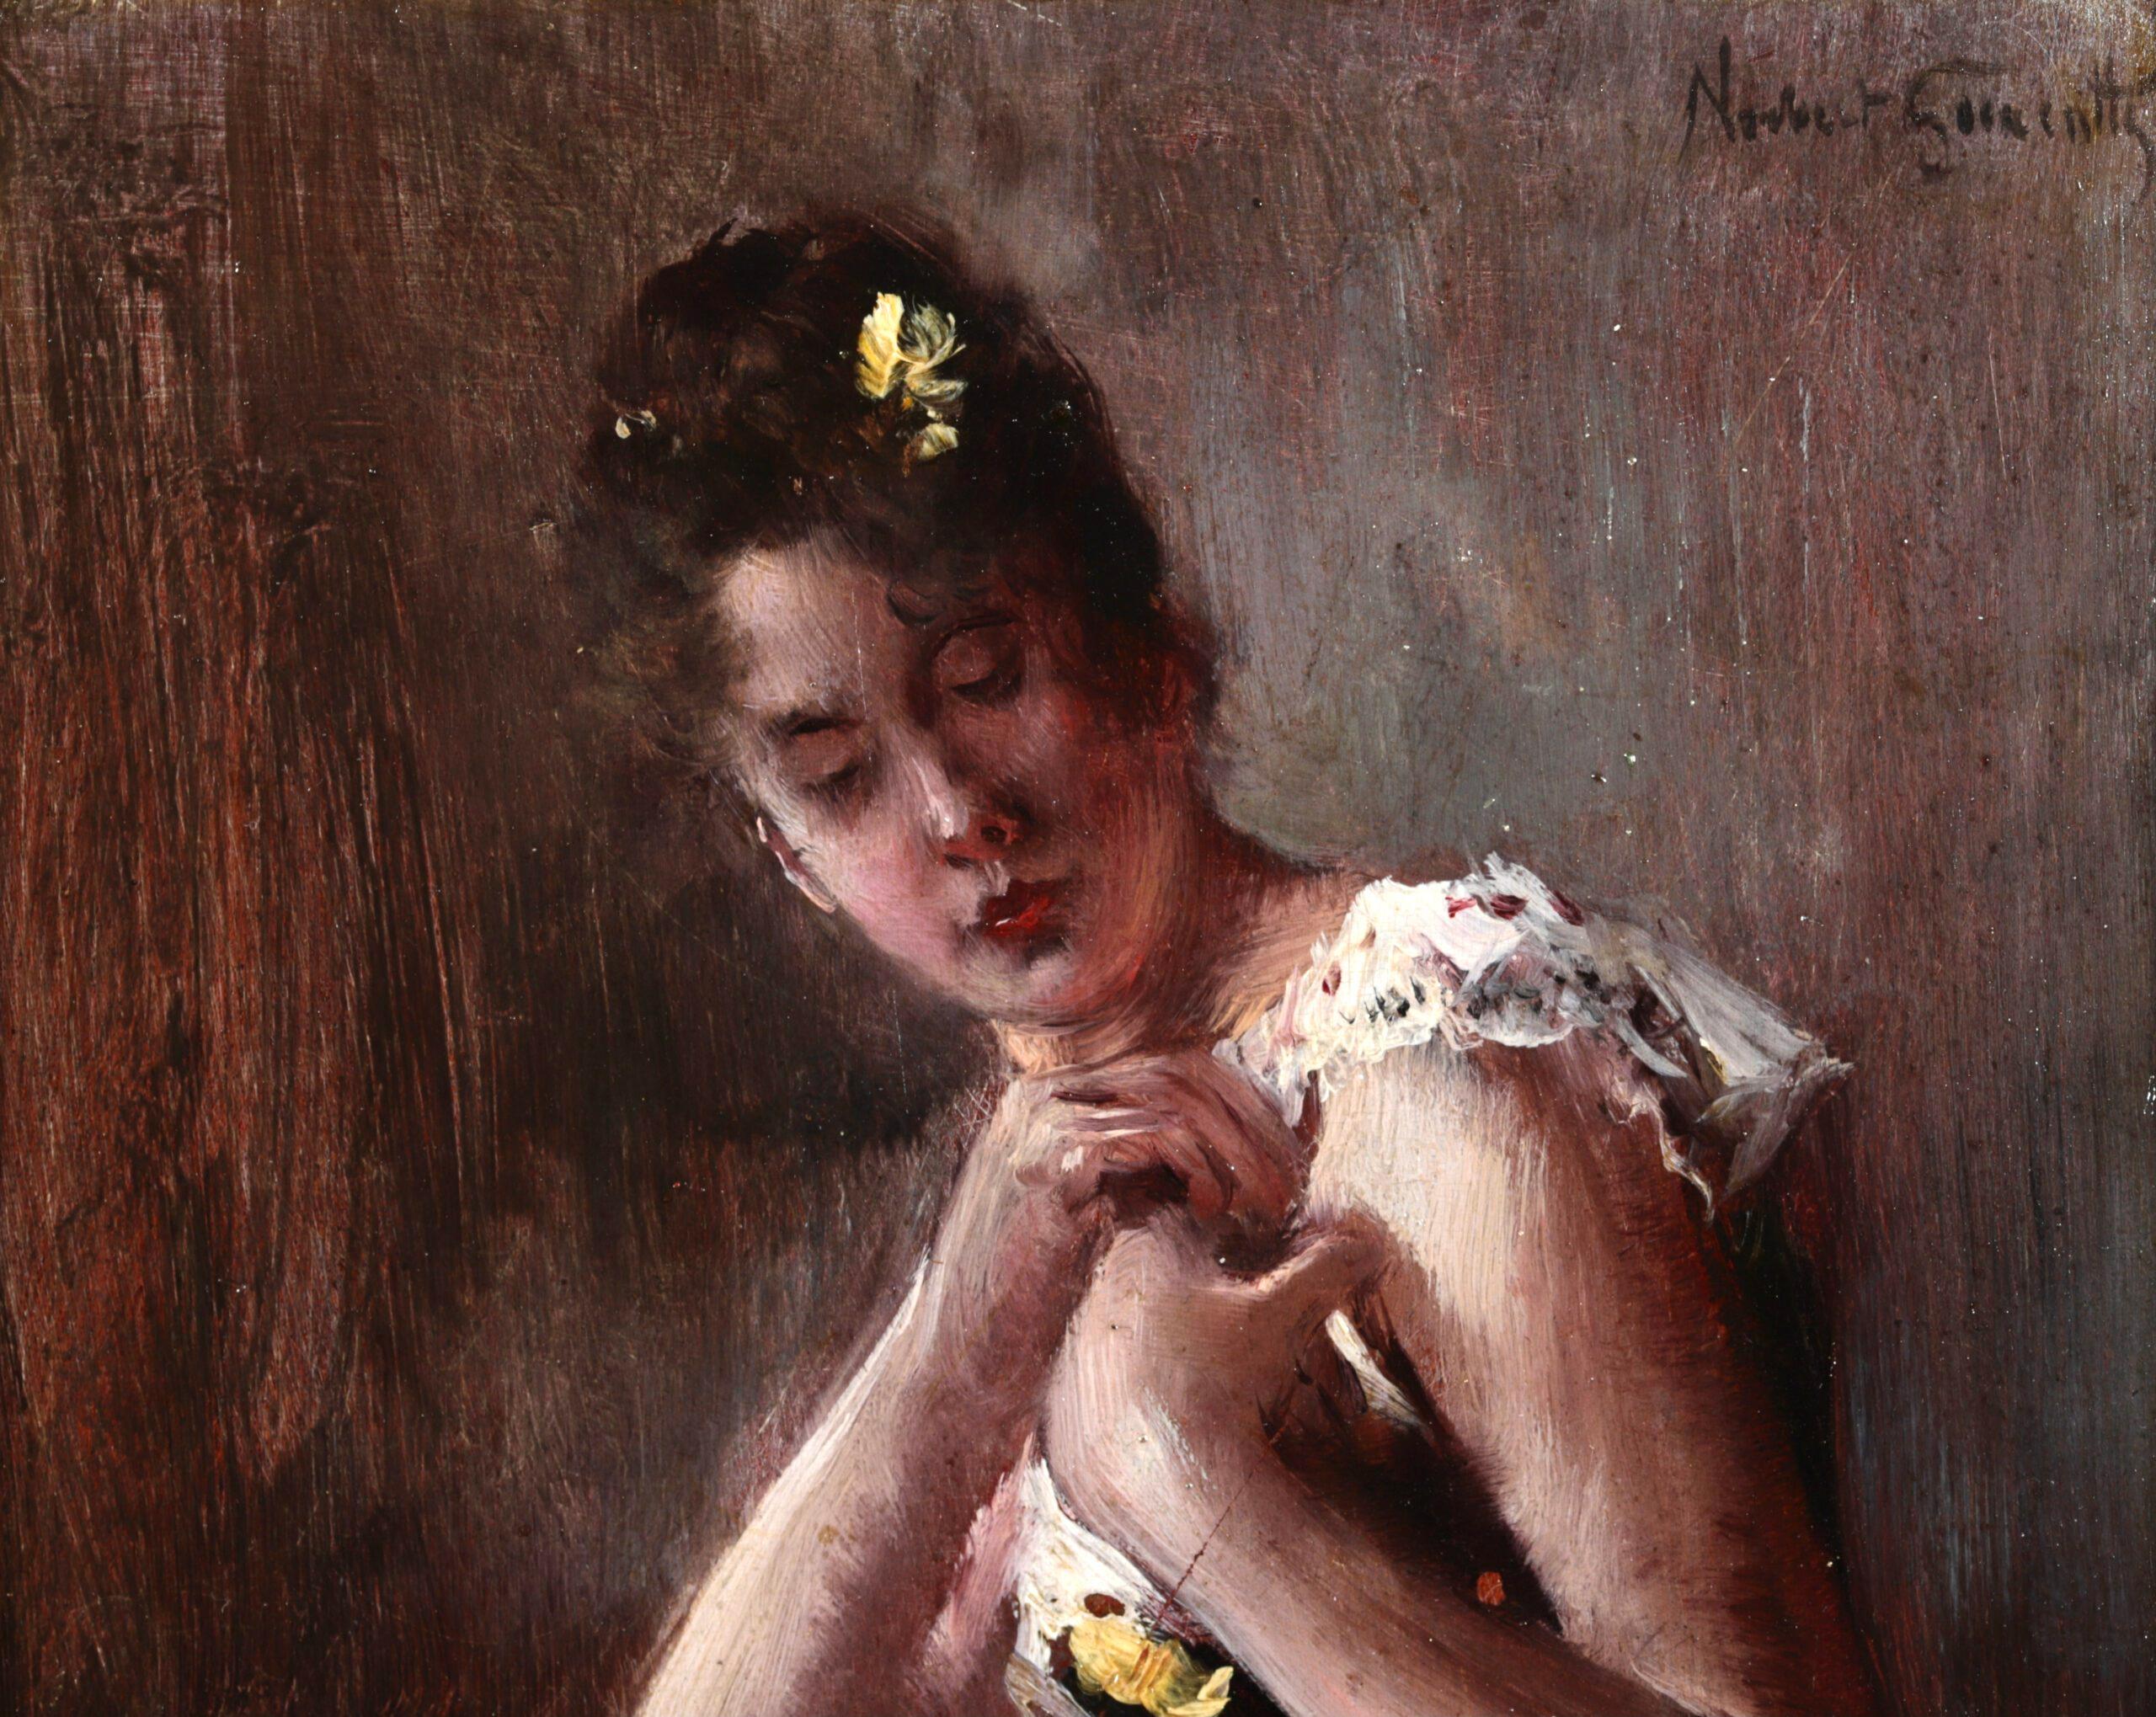 Dancer at the Opera - Impressionist Portrait Oil Painting by Norbert Goeneutte For Sale 1